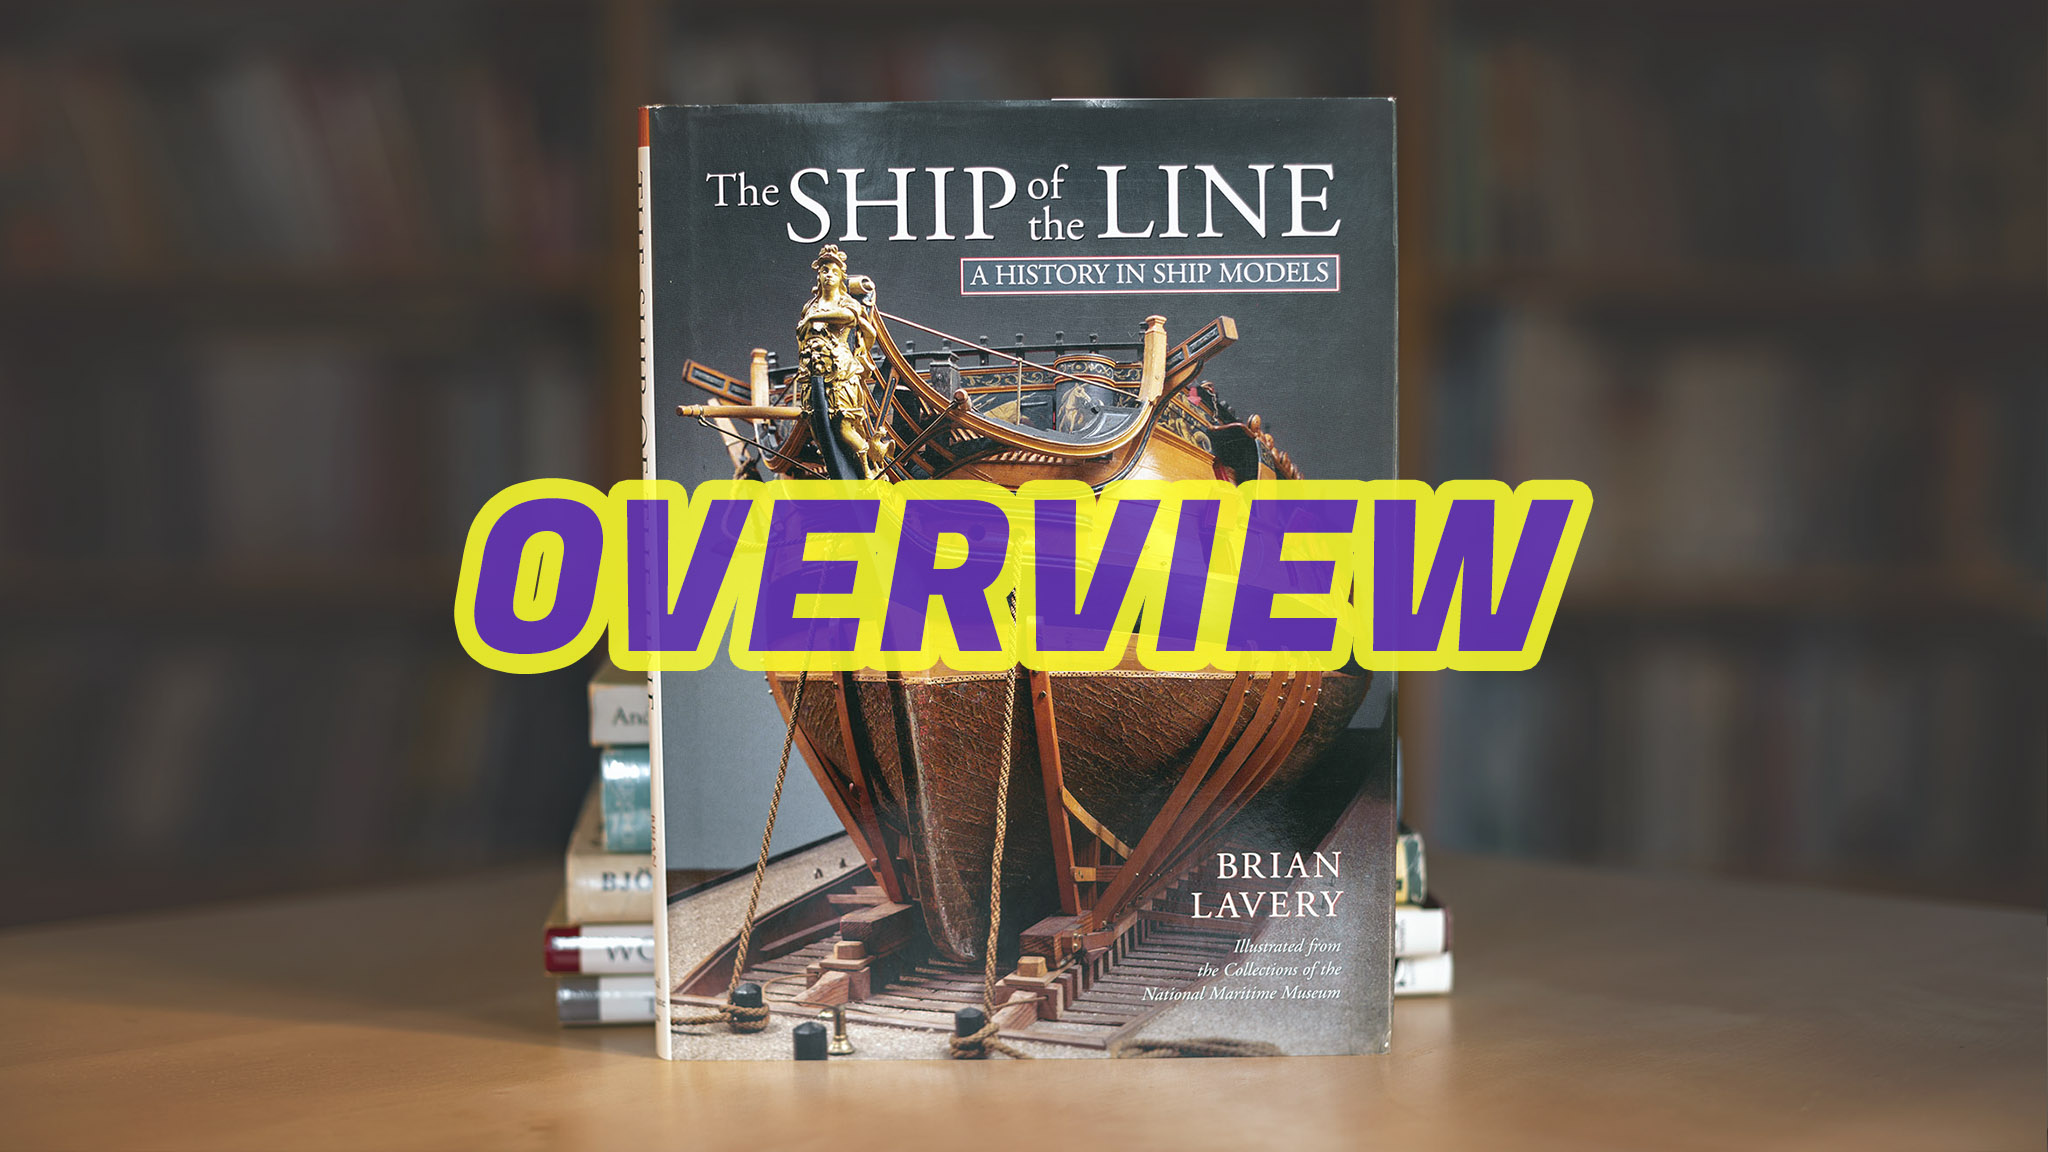 056-OVERVIEW-Ship of the Line.jpg